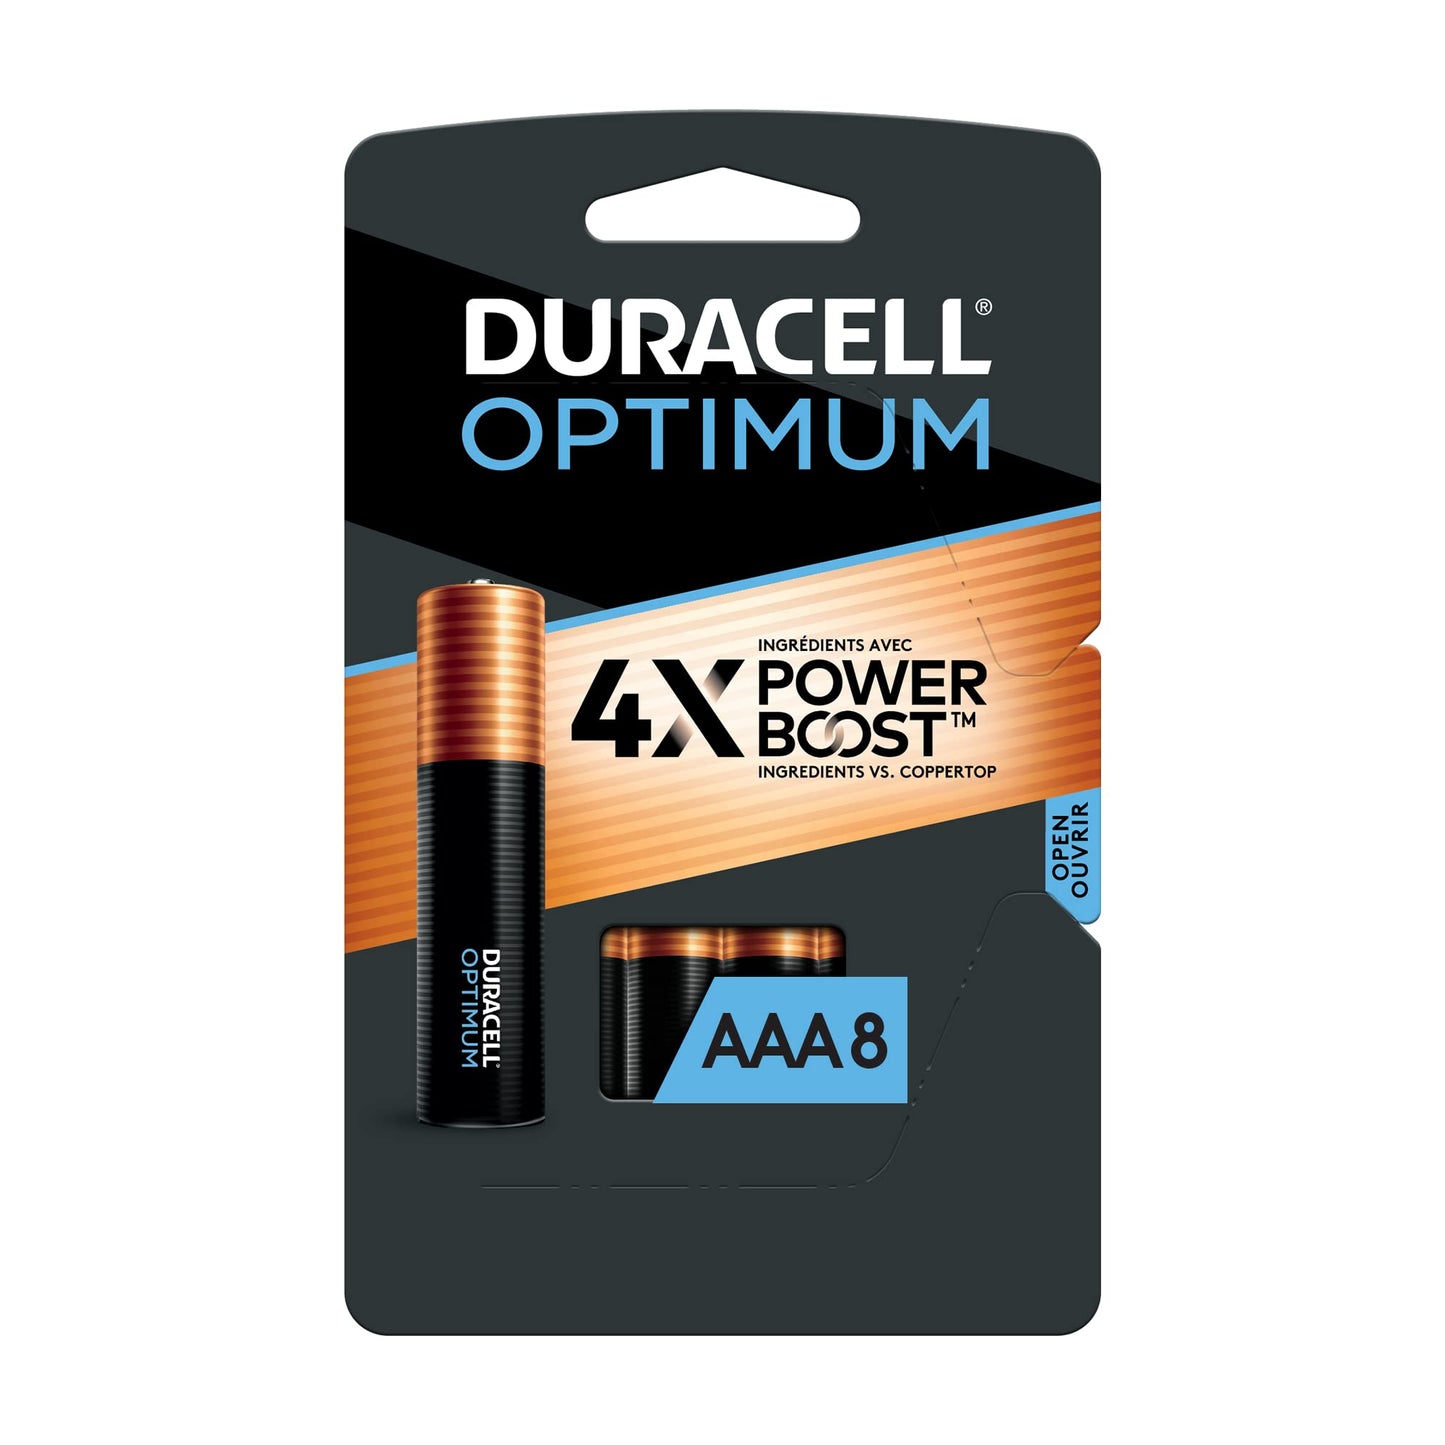 Duracell Optimum AAA Batteries - 8pk Alkaline Battery with Resealable Tray